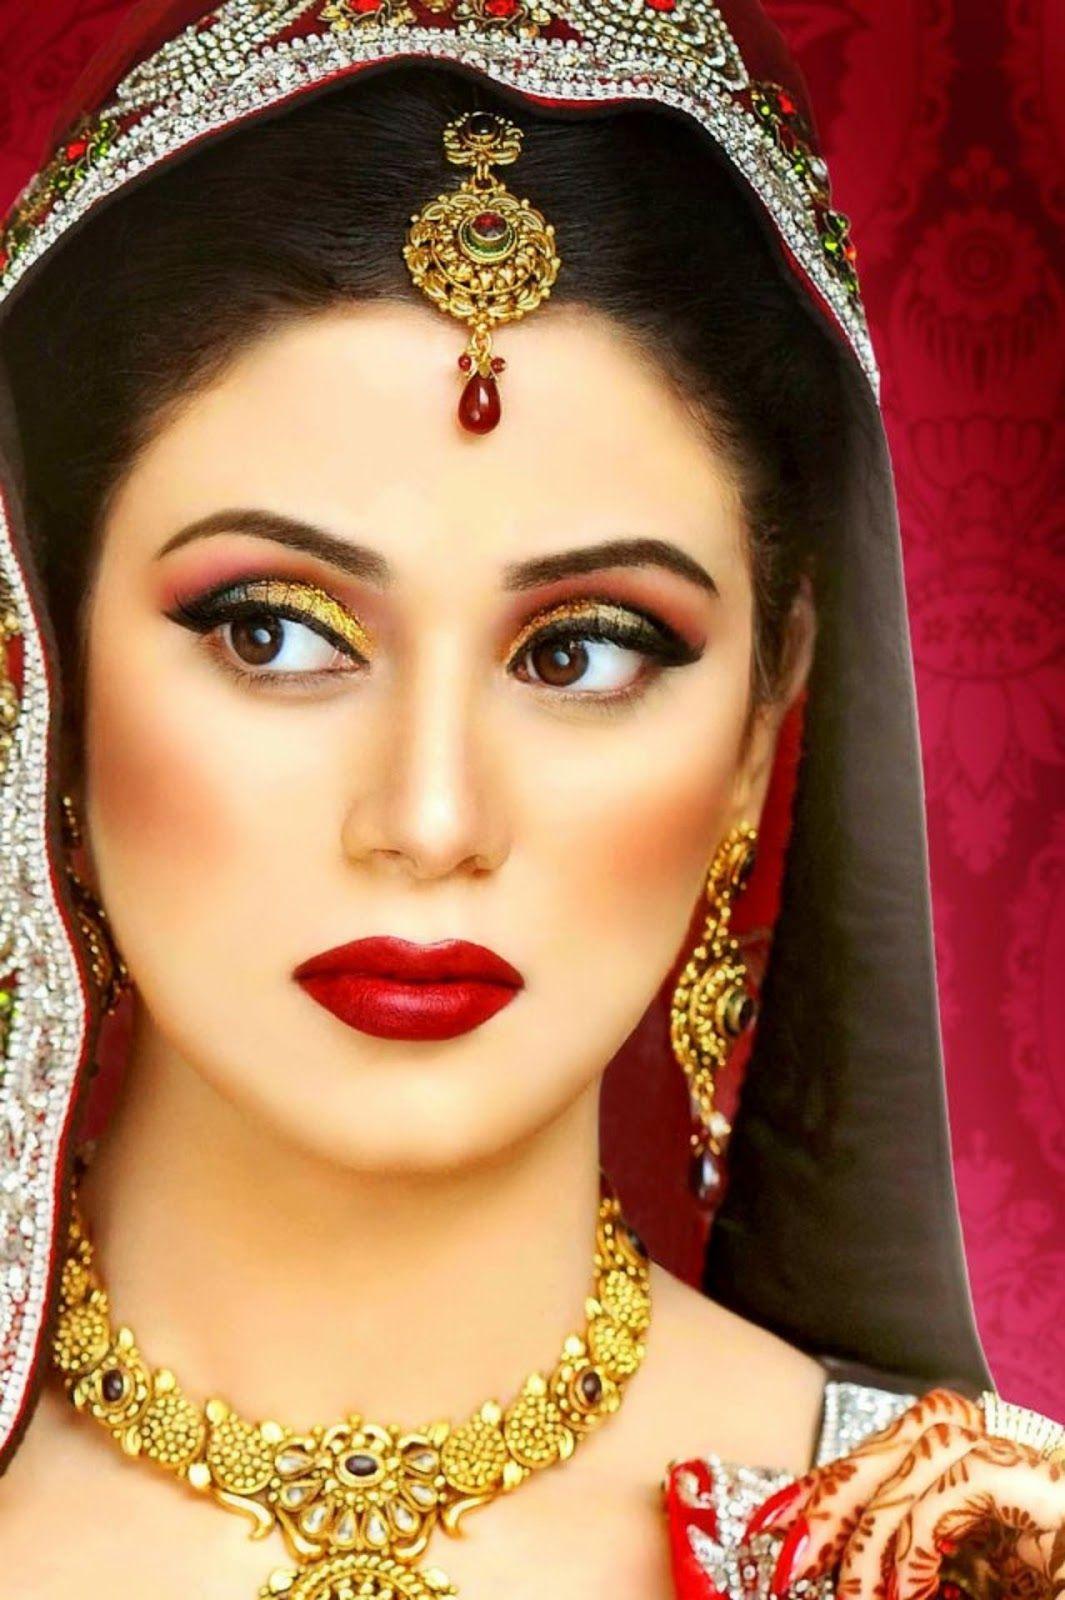 Indian Dulhan New Look Makeup Ideas 2014 For Girls Image Download